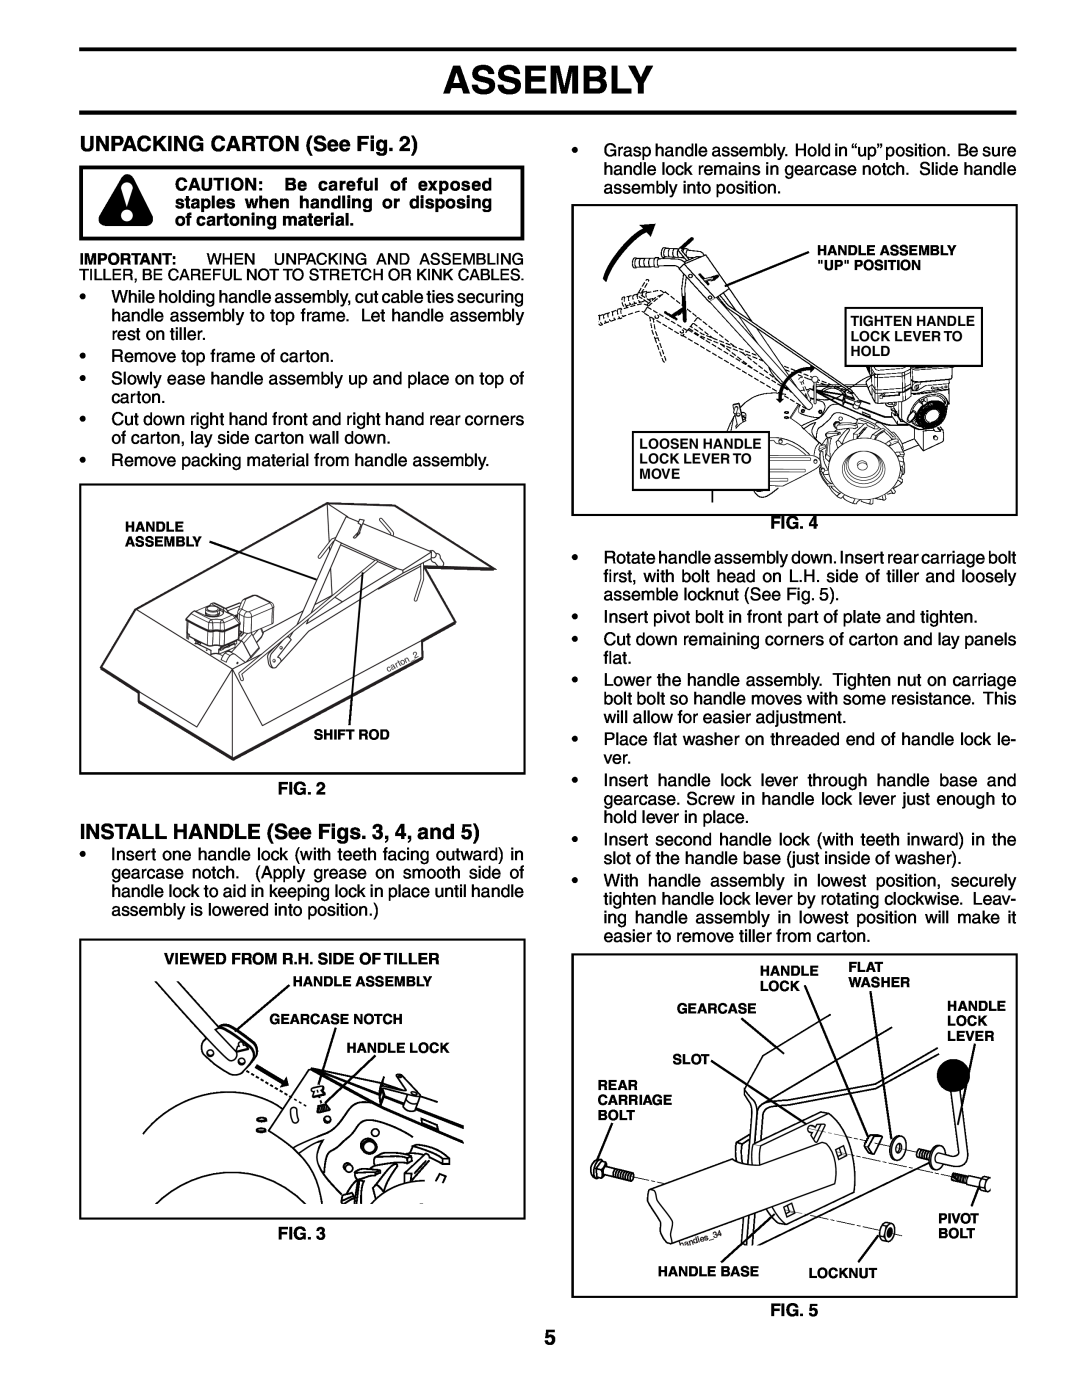 Poulan MRT500 owner manual UNPACKING CARTON See Fig, INSTALL HANDLE See Figs. 3, 4, and, Assembly 